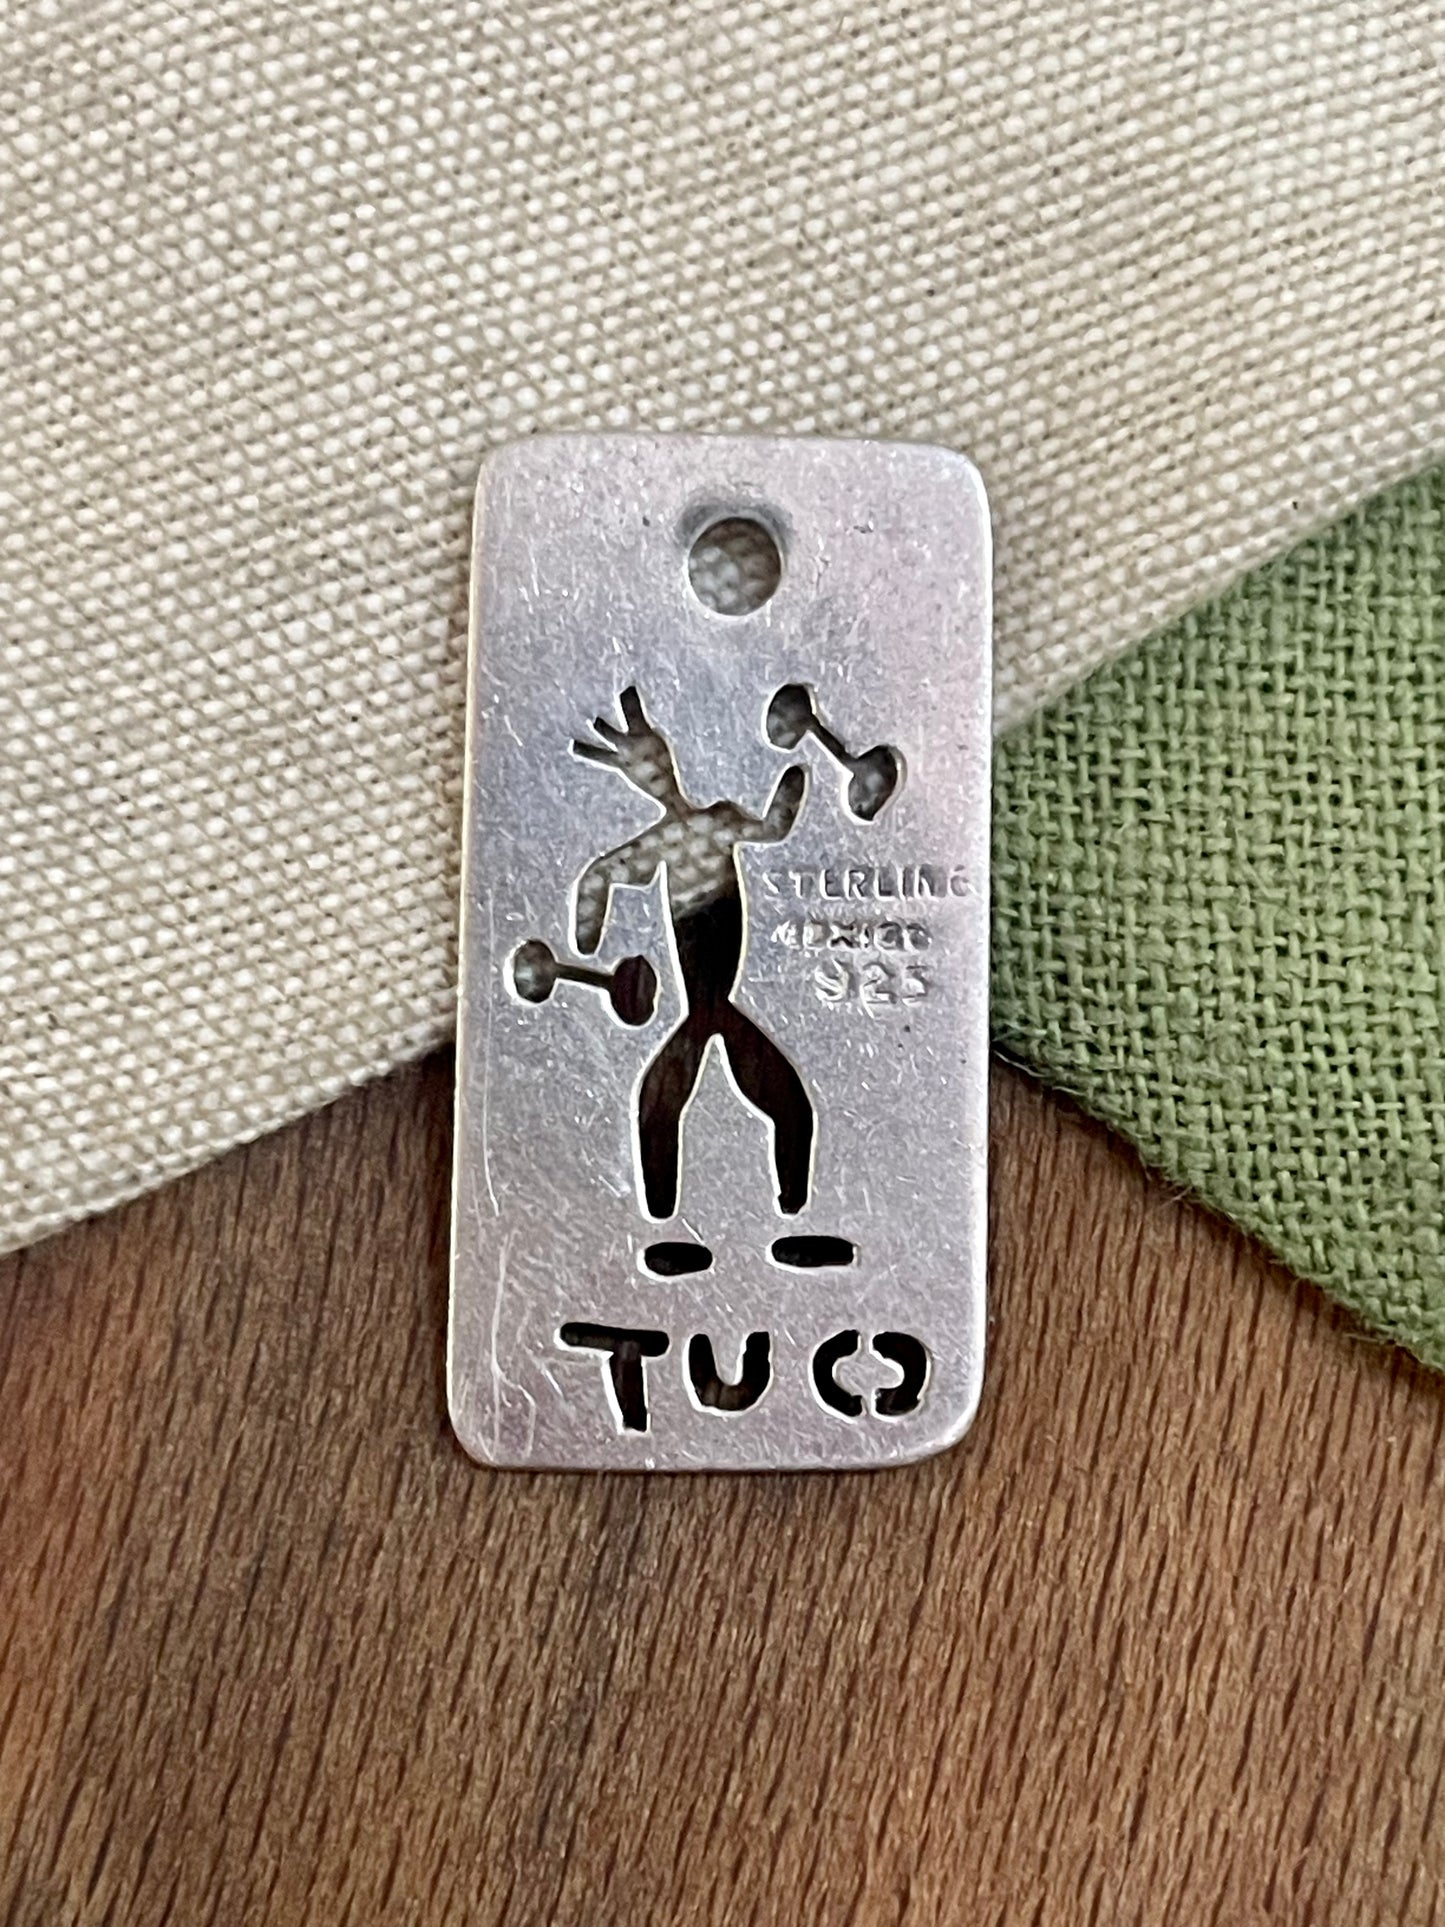 Working OUT Gym Dog Tag Necklace Pendant Solid 925 Sterling Silver Vintage Retro